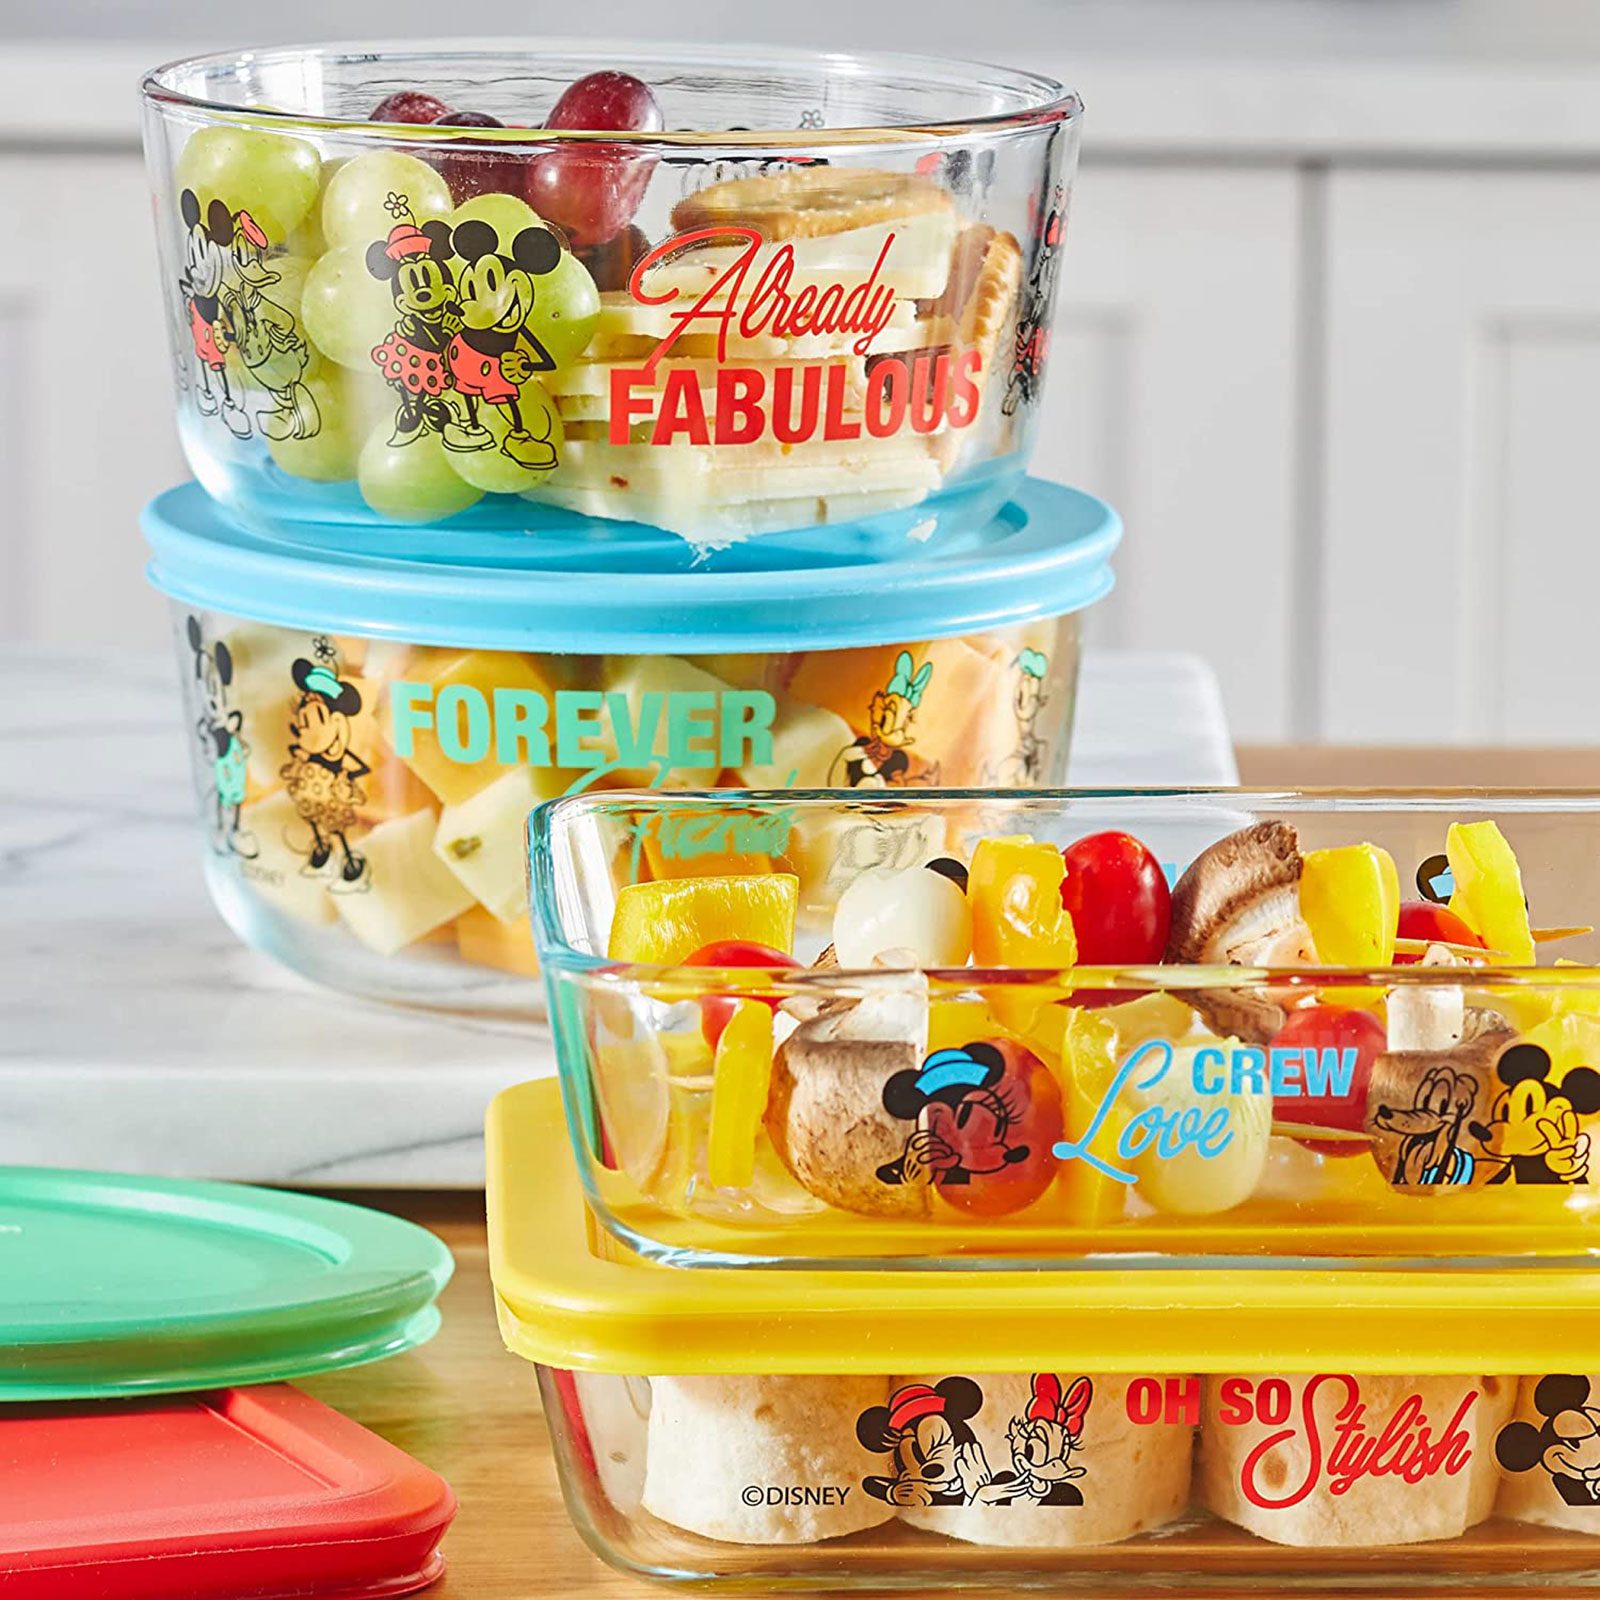 You Can Now Find Disney Pyrex at Costco